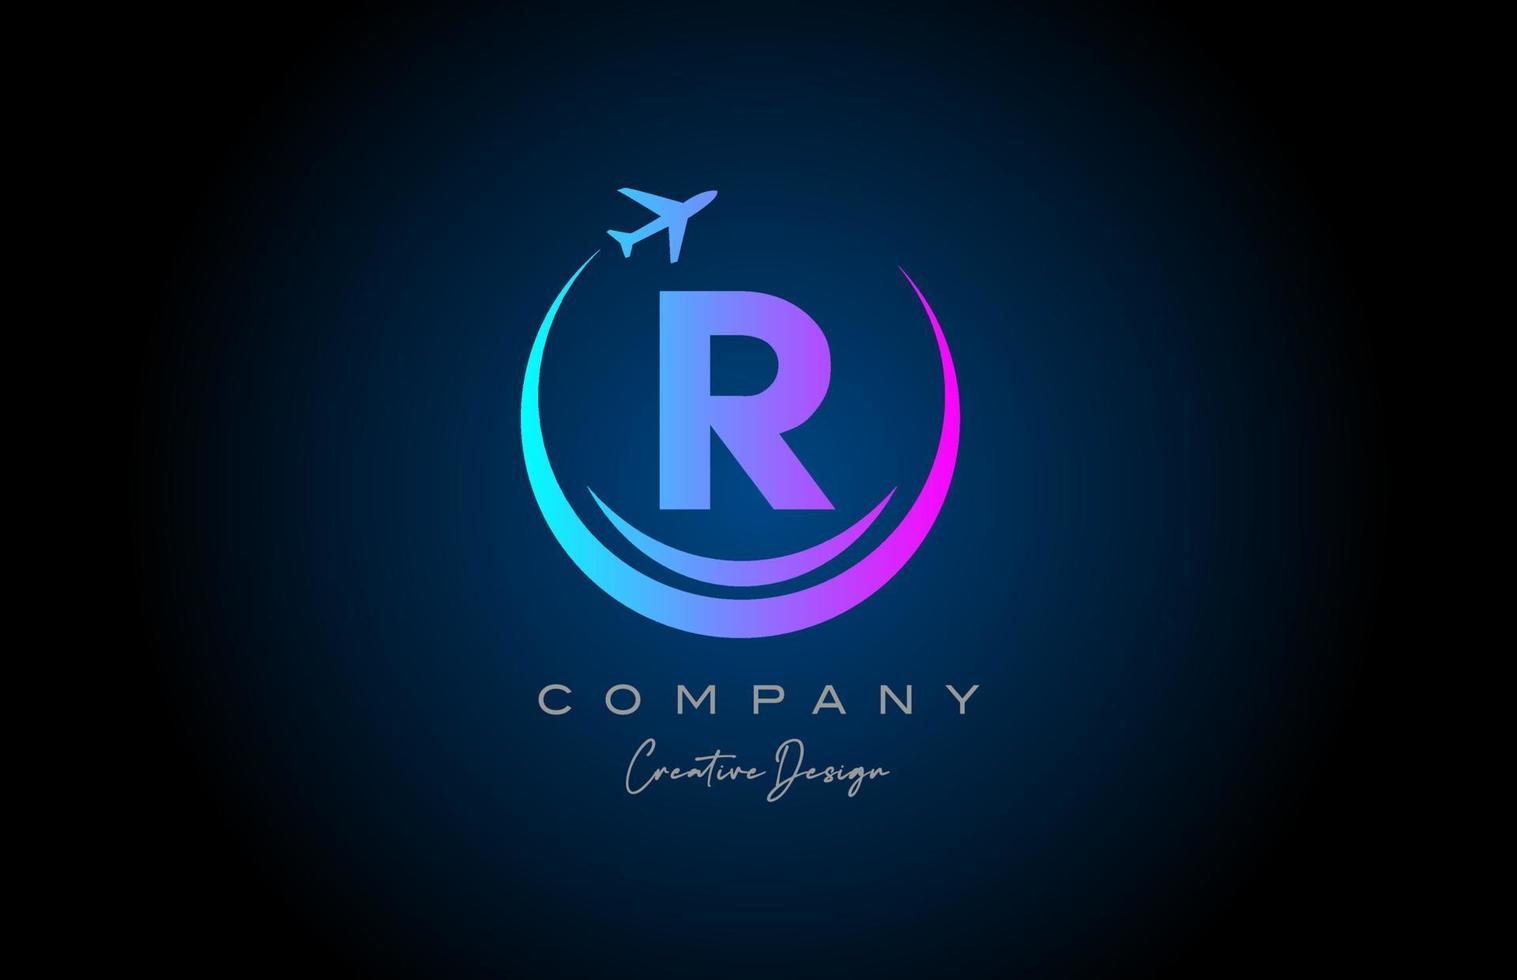 blue pink R alphabet letter logo with plane for a travel or booking agency. Corporate creative template design for company and business vector